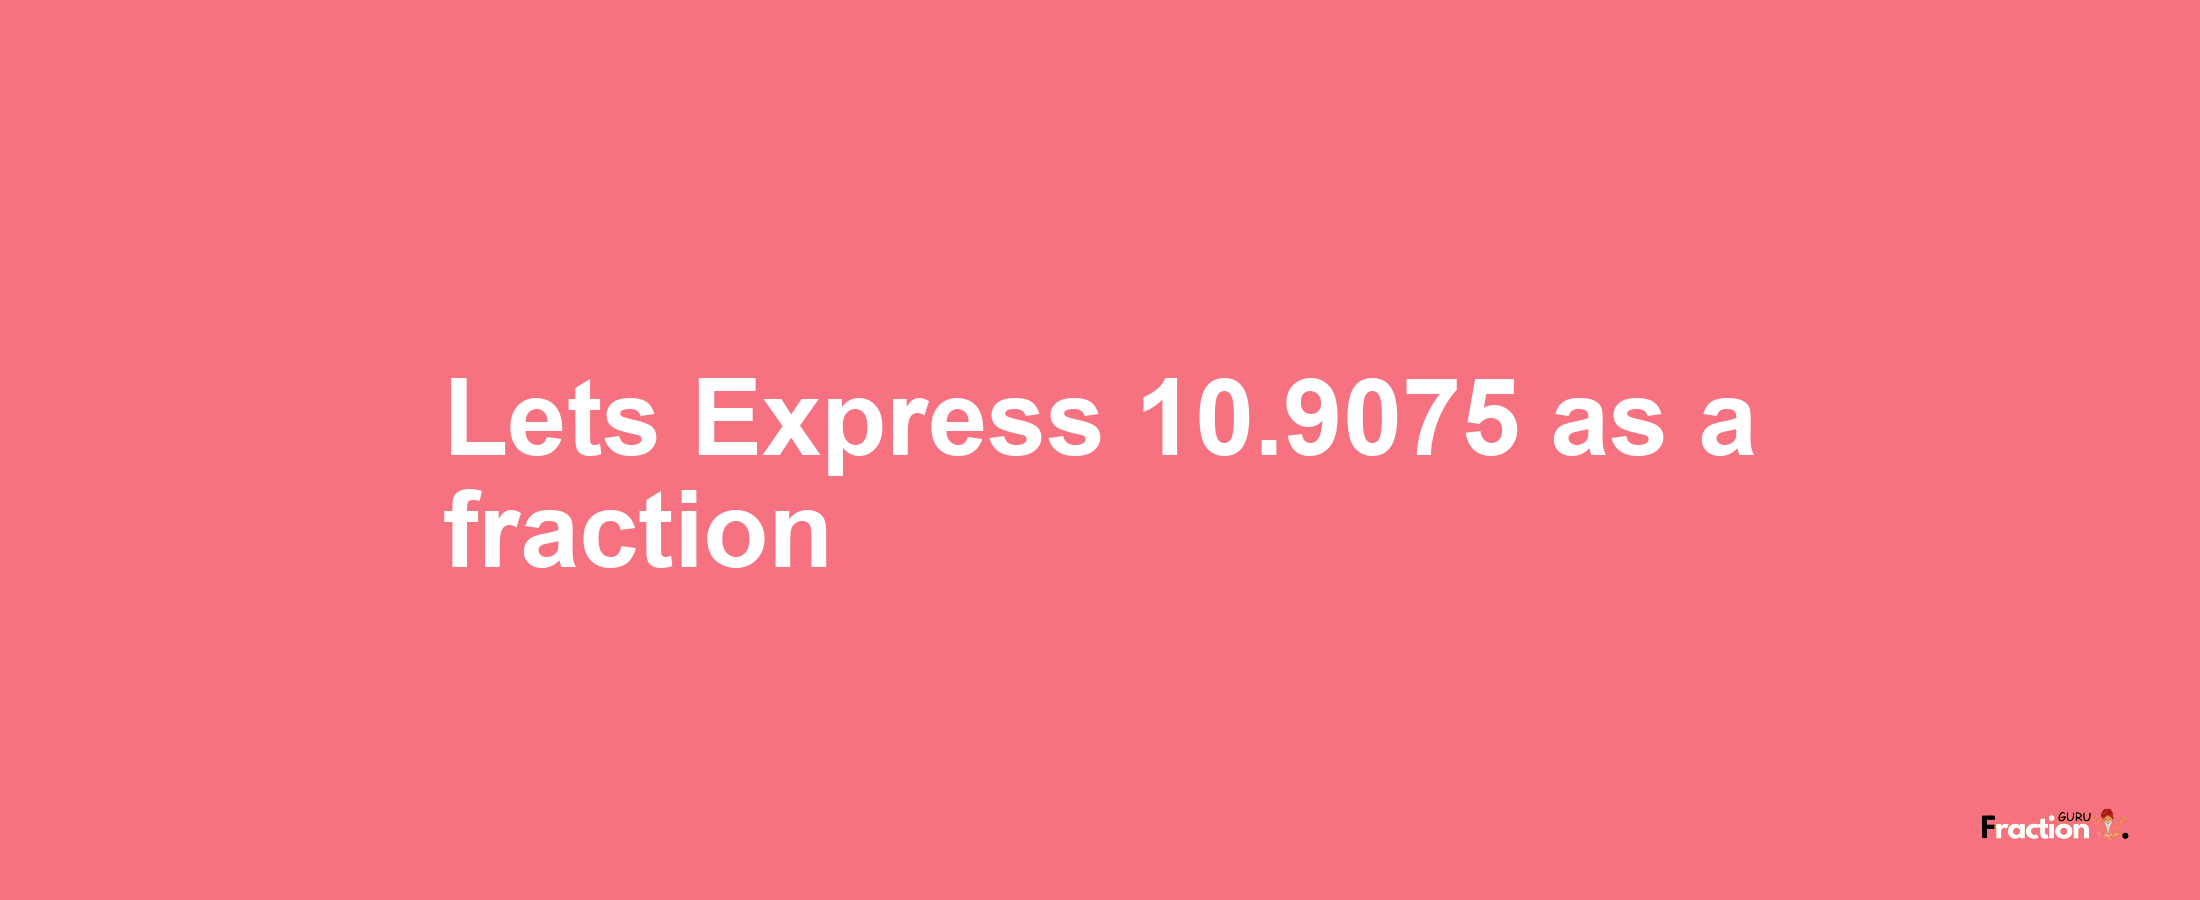 Lets Express 10.9075 as afraction